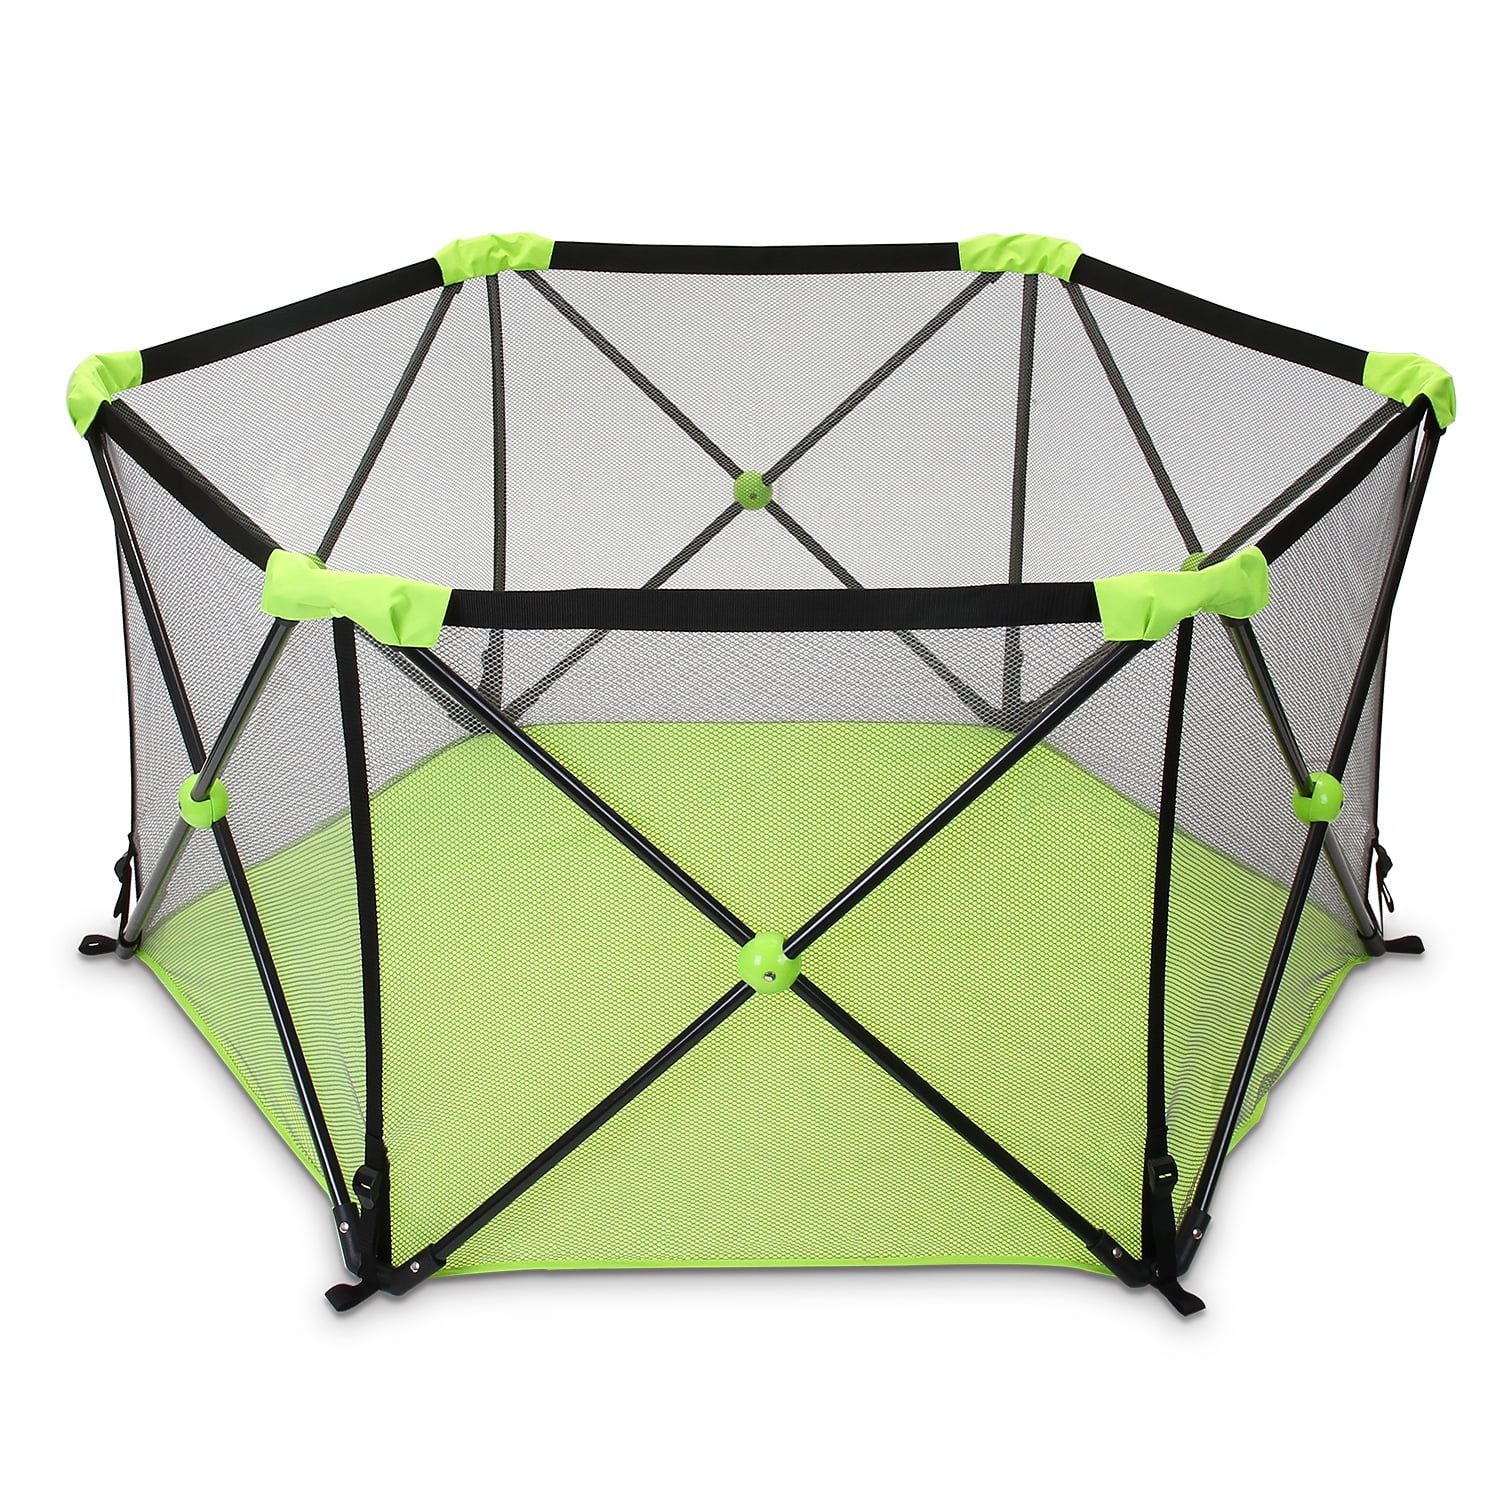 2-Colour Foldable Playpen 7-Panel Portable Playard Play Pen for Infants/Safety Lock and Carry Case Easily Opens with 1 Hand